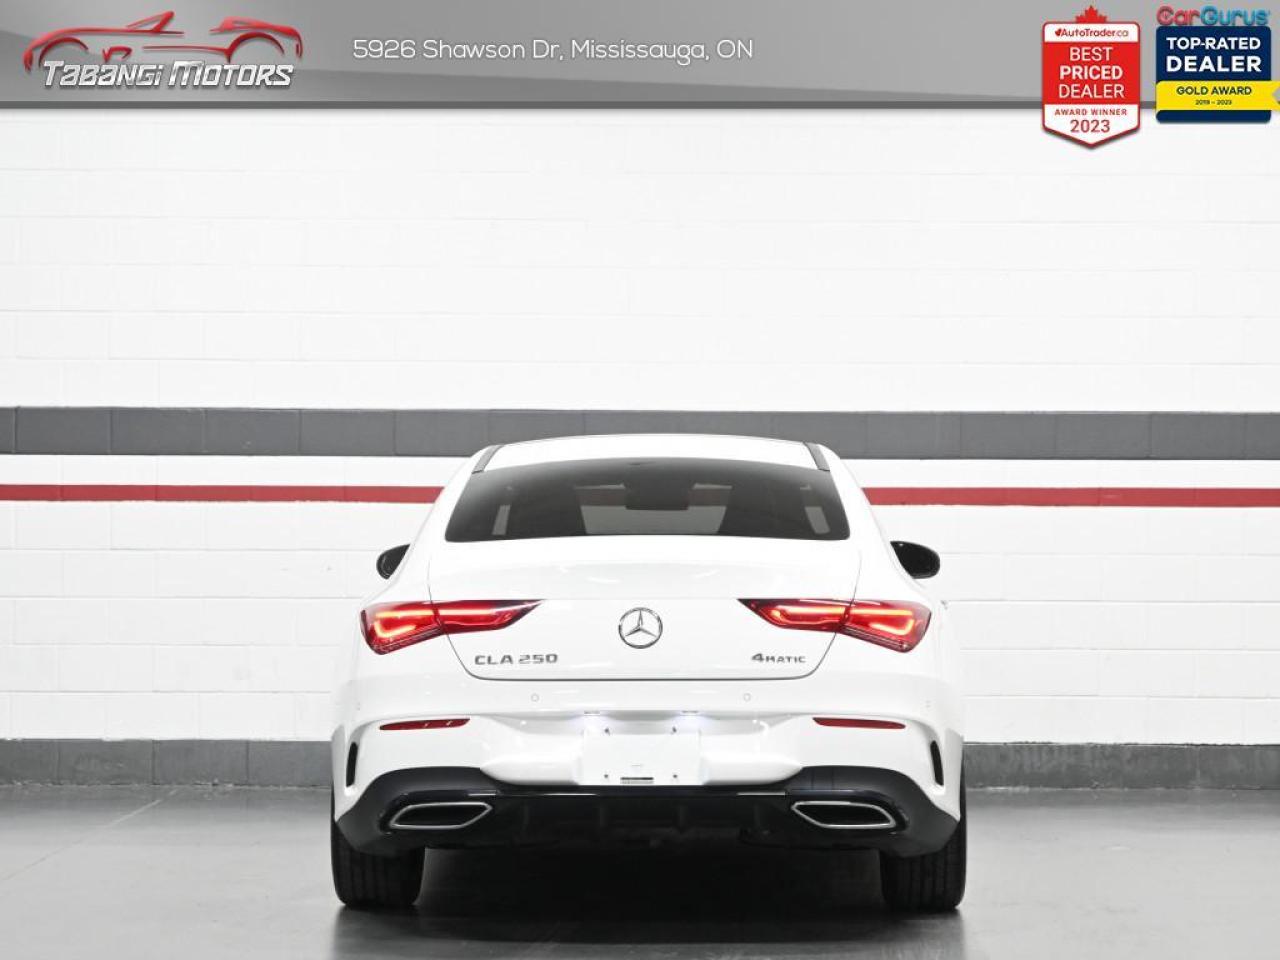 Used 2022 Mercedes-Benz CLA-Class 250 4MATIC No Accident AMG Night Pkg  360CAM Ambient Light for Sale in Mississauga